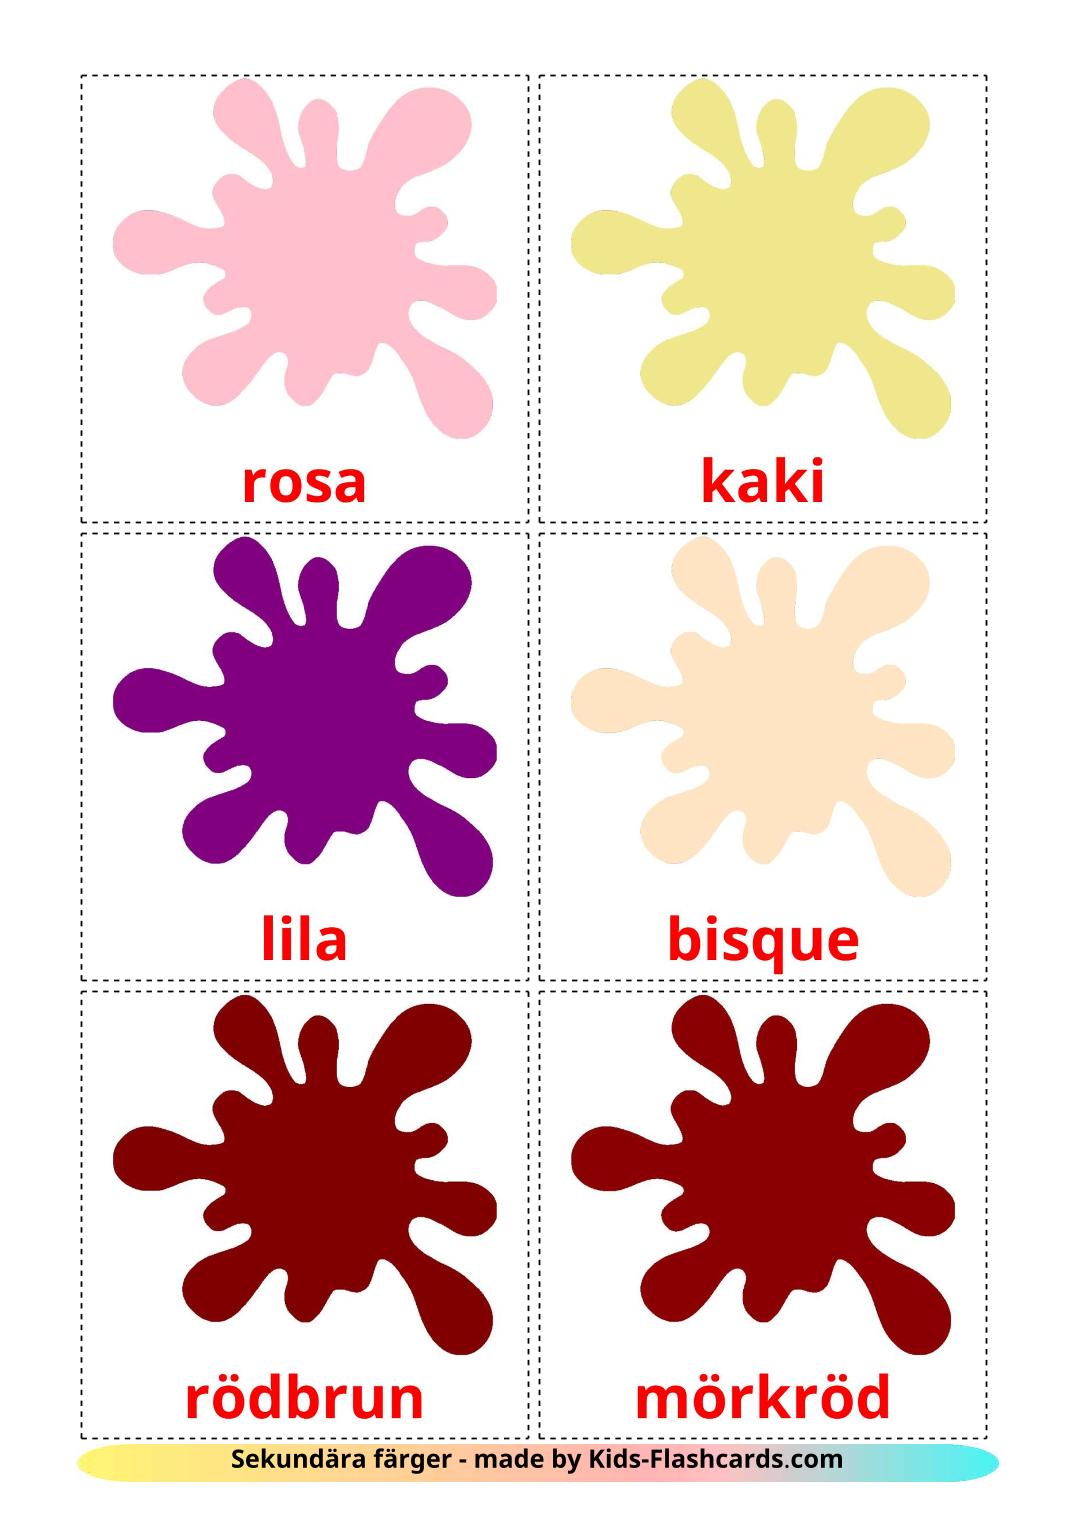 Secondary colors - 20 Free Printable swedish Flashcards 